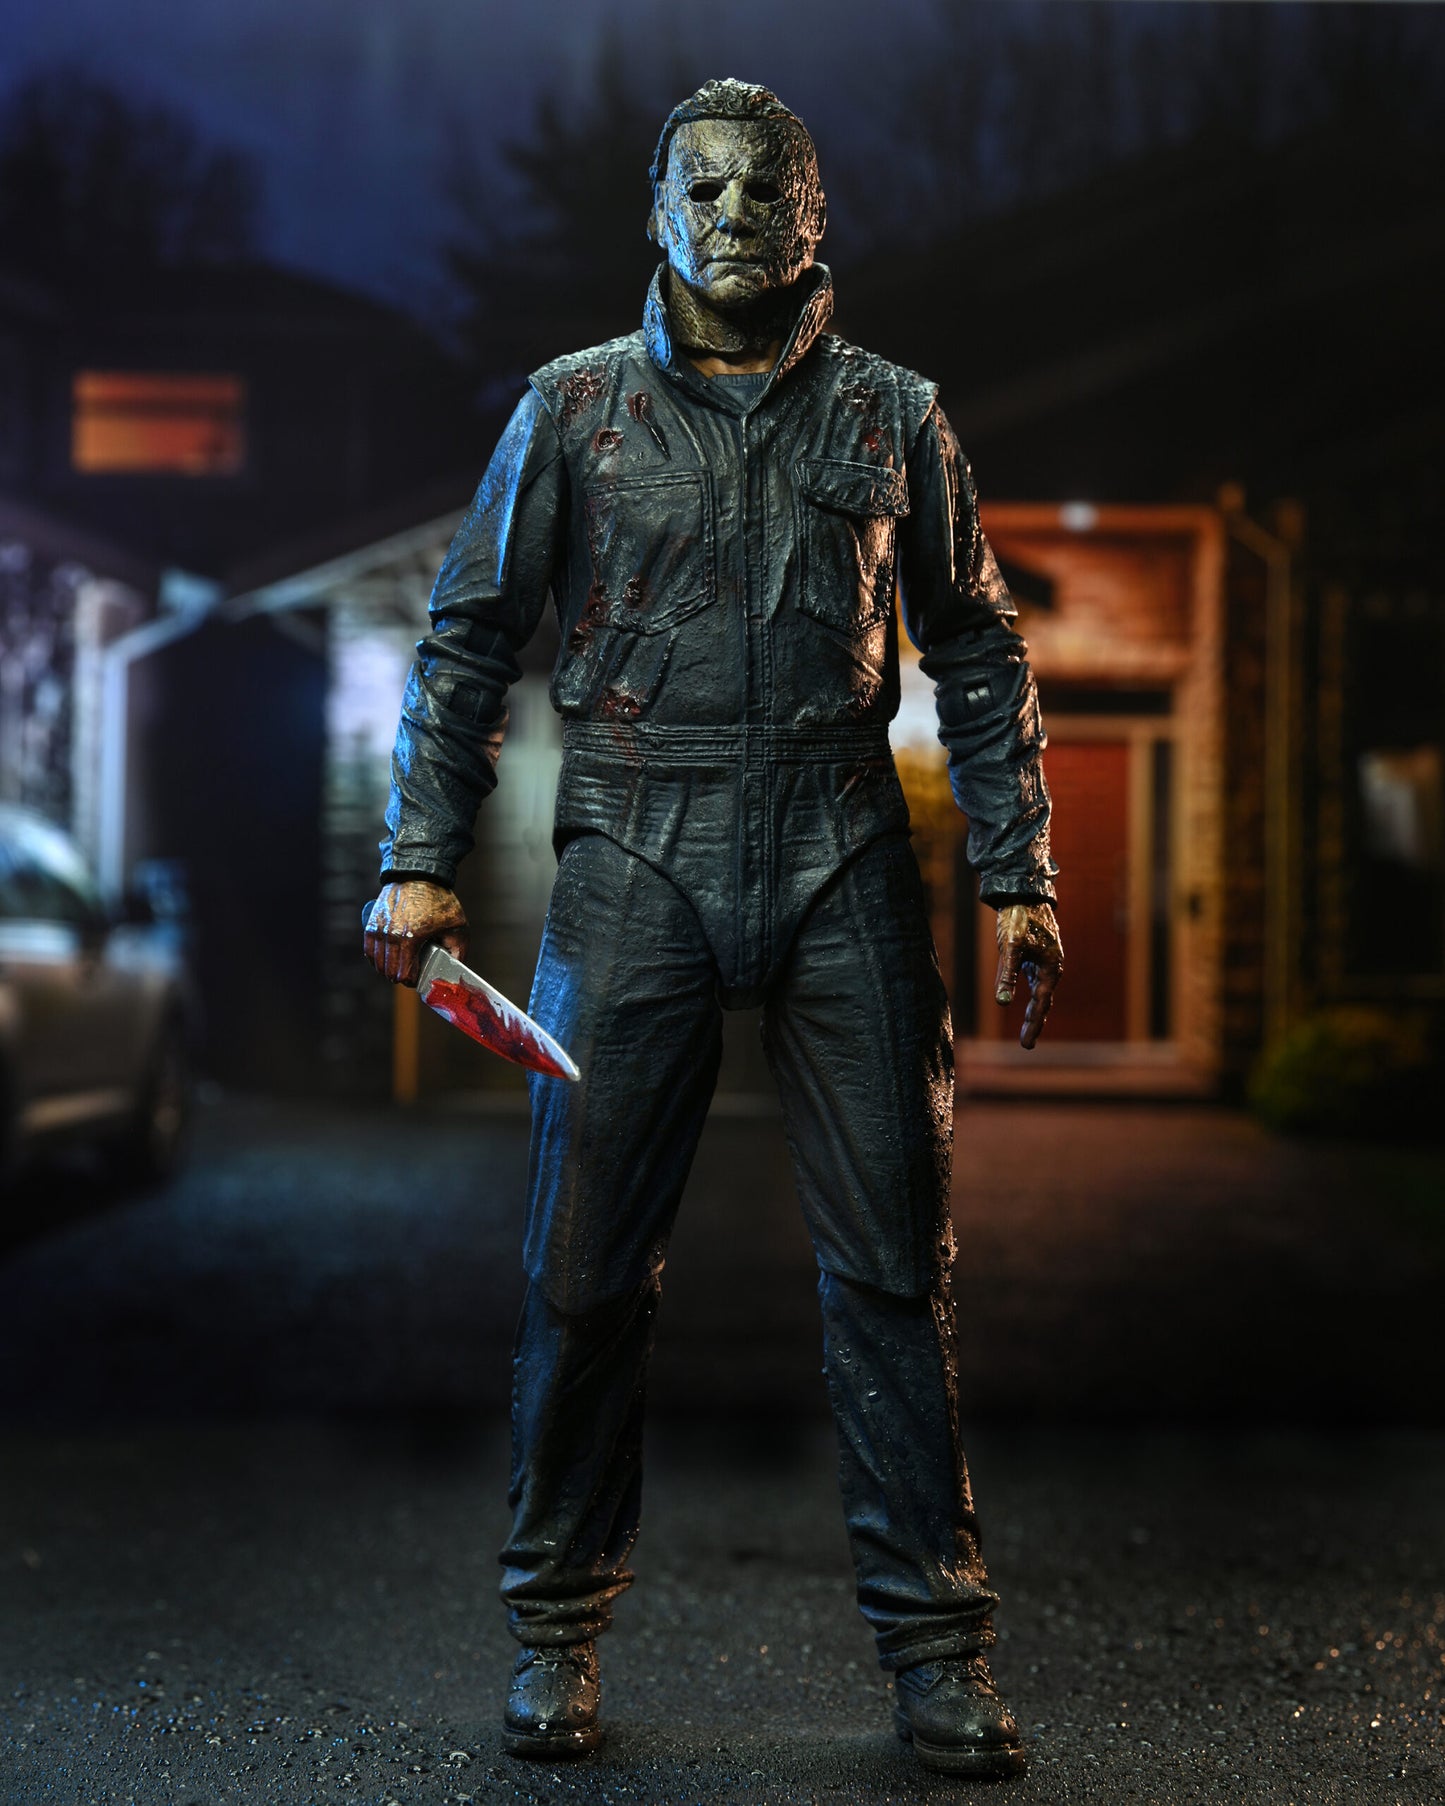 Halloween Ends

7” Scale Action Figure – Ultimate Michael Myers